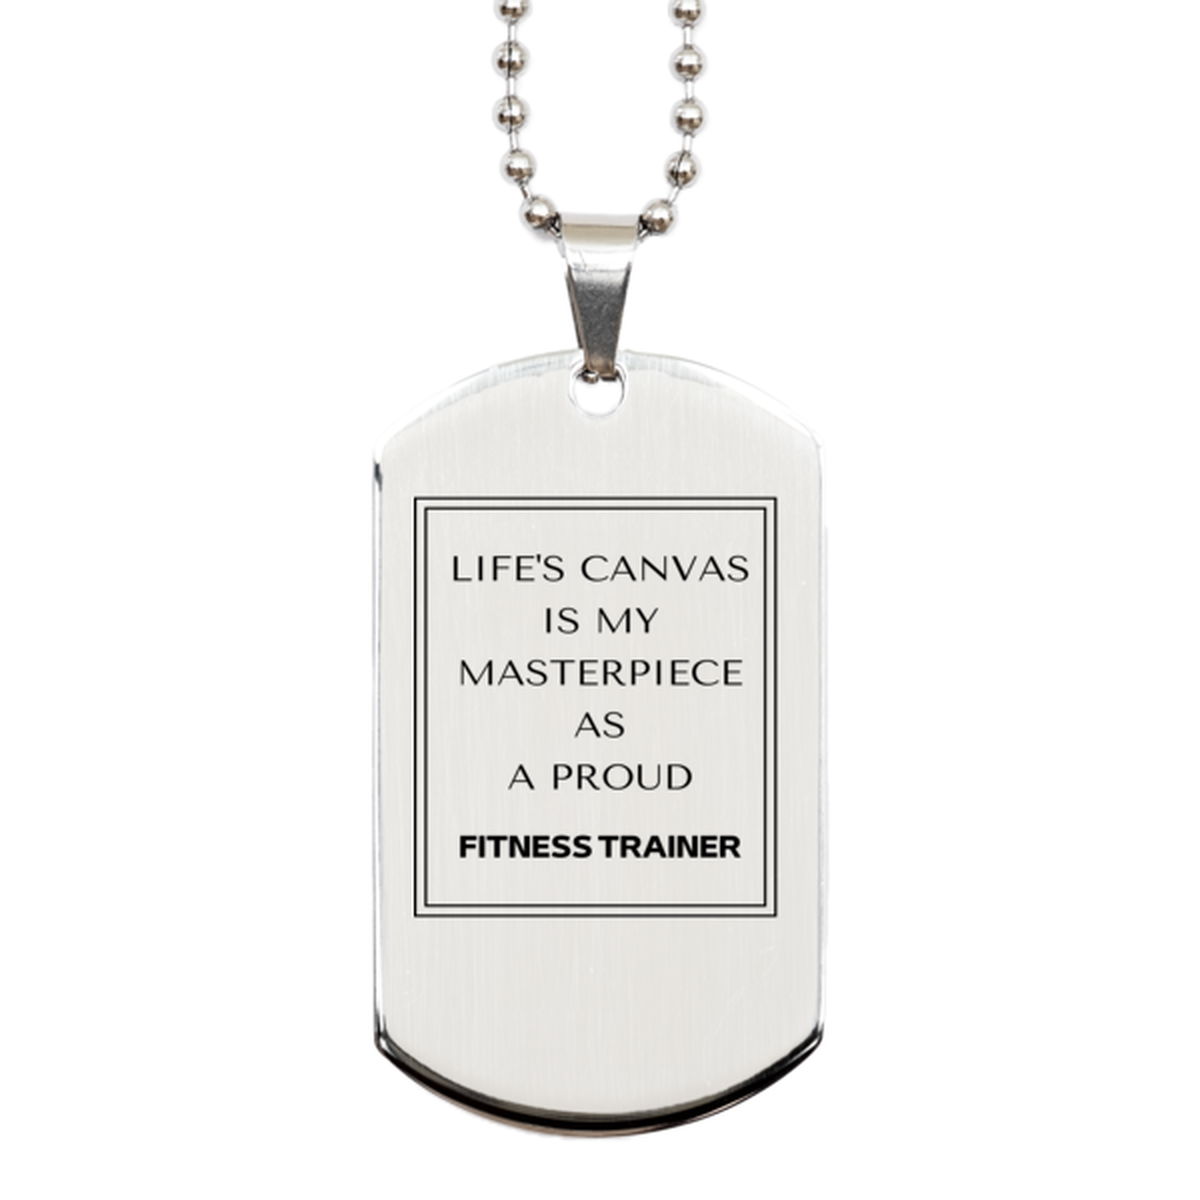 Proud Fitness Trainer Gifts, Life's canvas is my masterpiece, Epic Birthday Christmas Unique Silver Dog Tag For Fitness Trainer, Coworkers, Men, Women, Friends